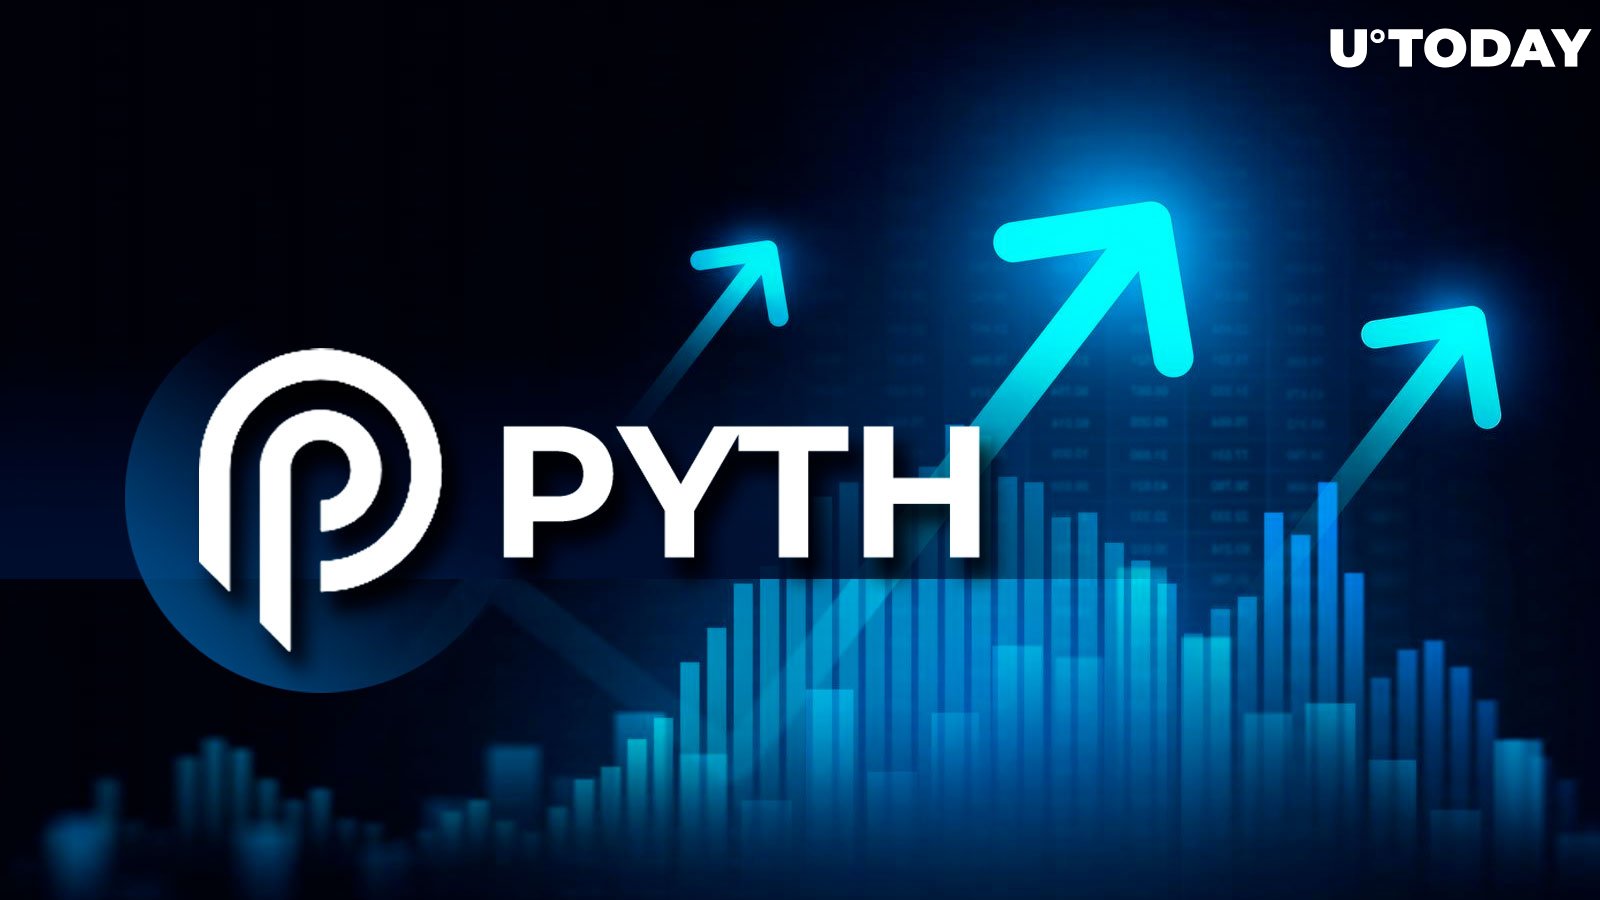 Solana-Based PYTH Token Soars 10% Following Pyth Network's Phase 2 Airdrop